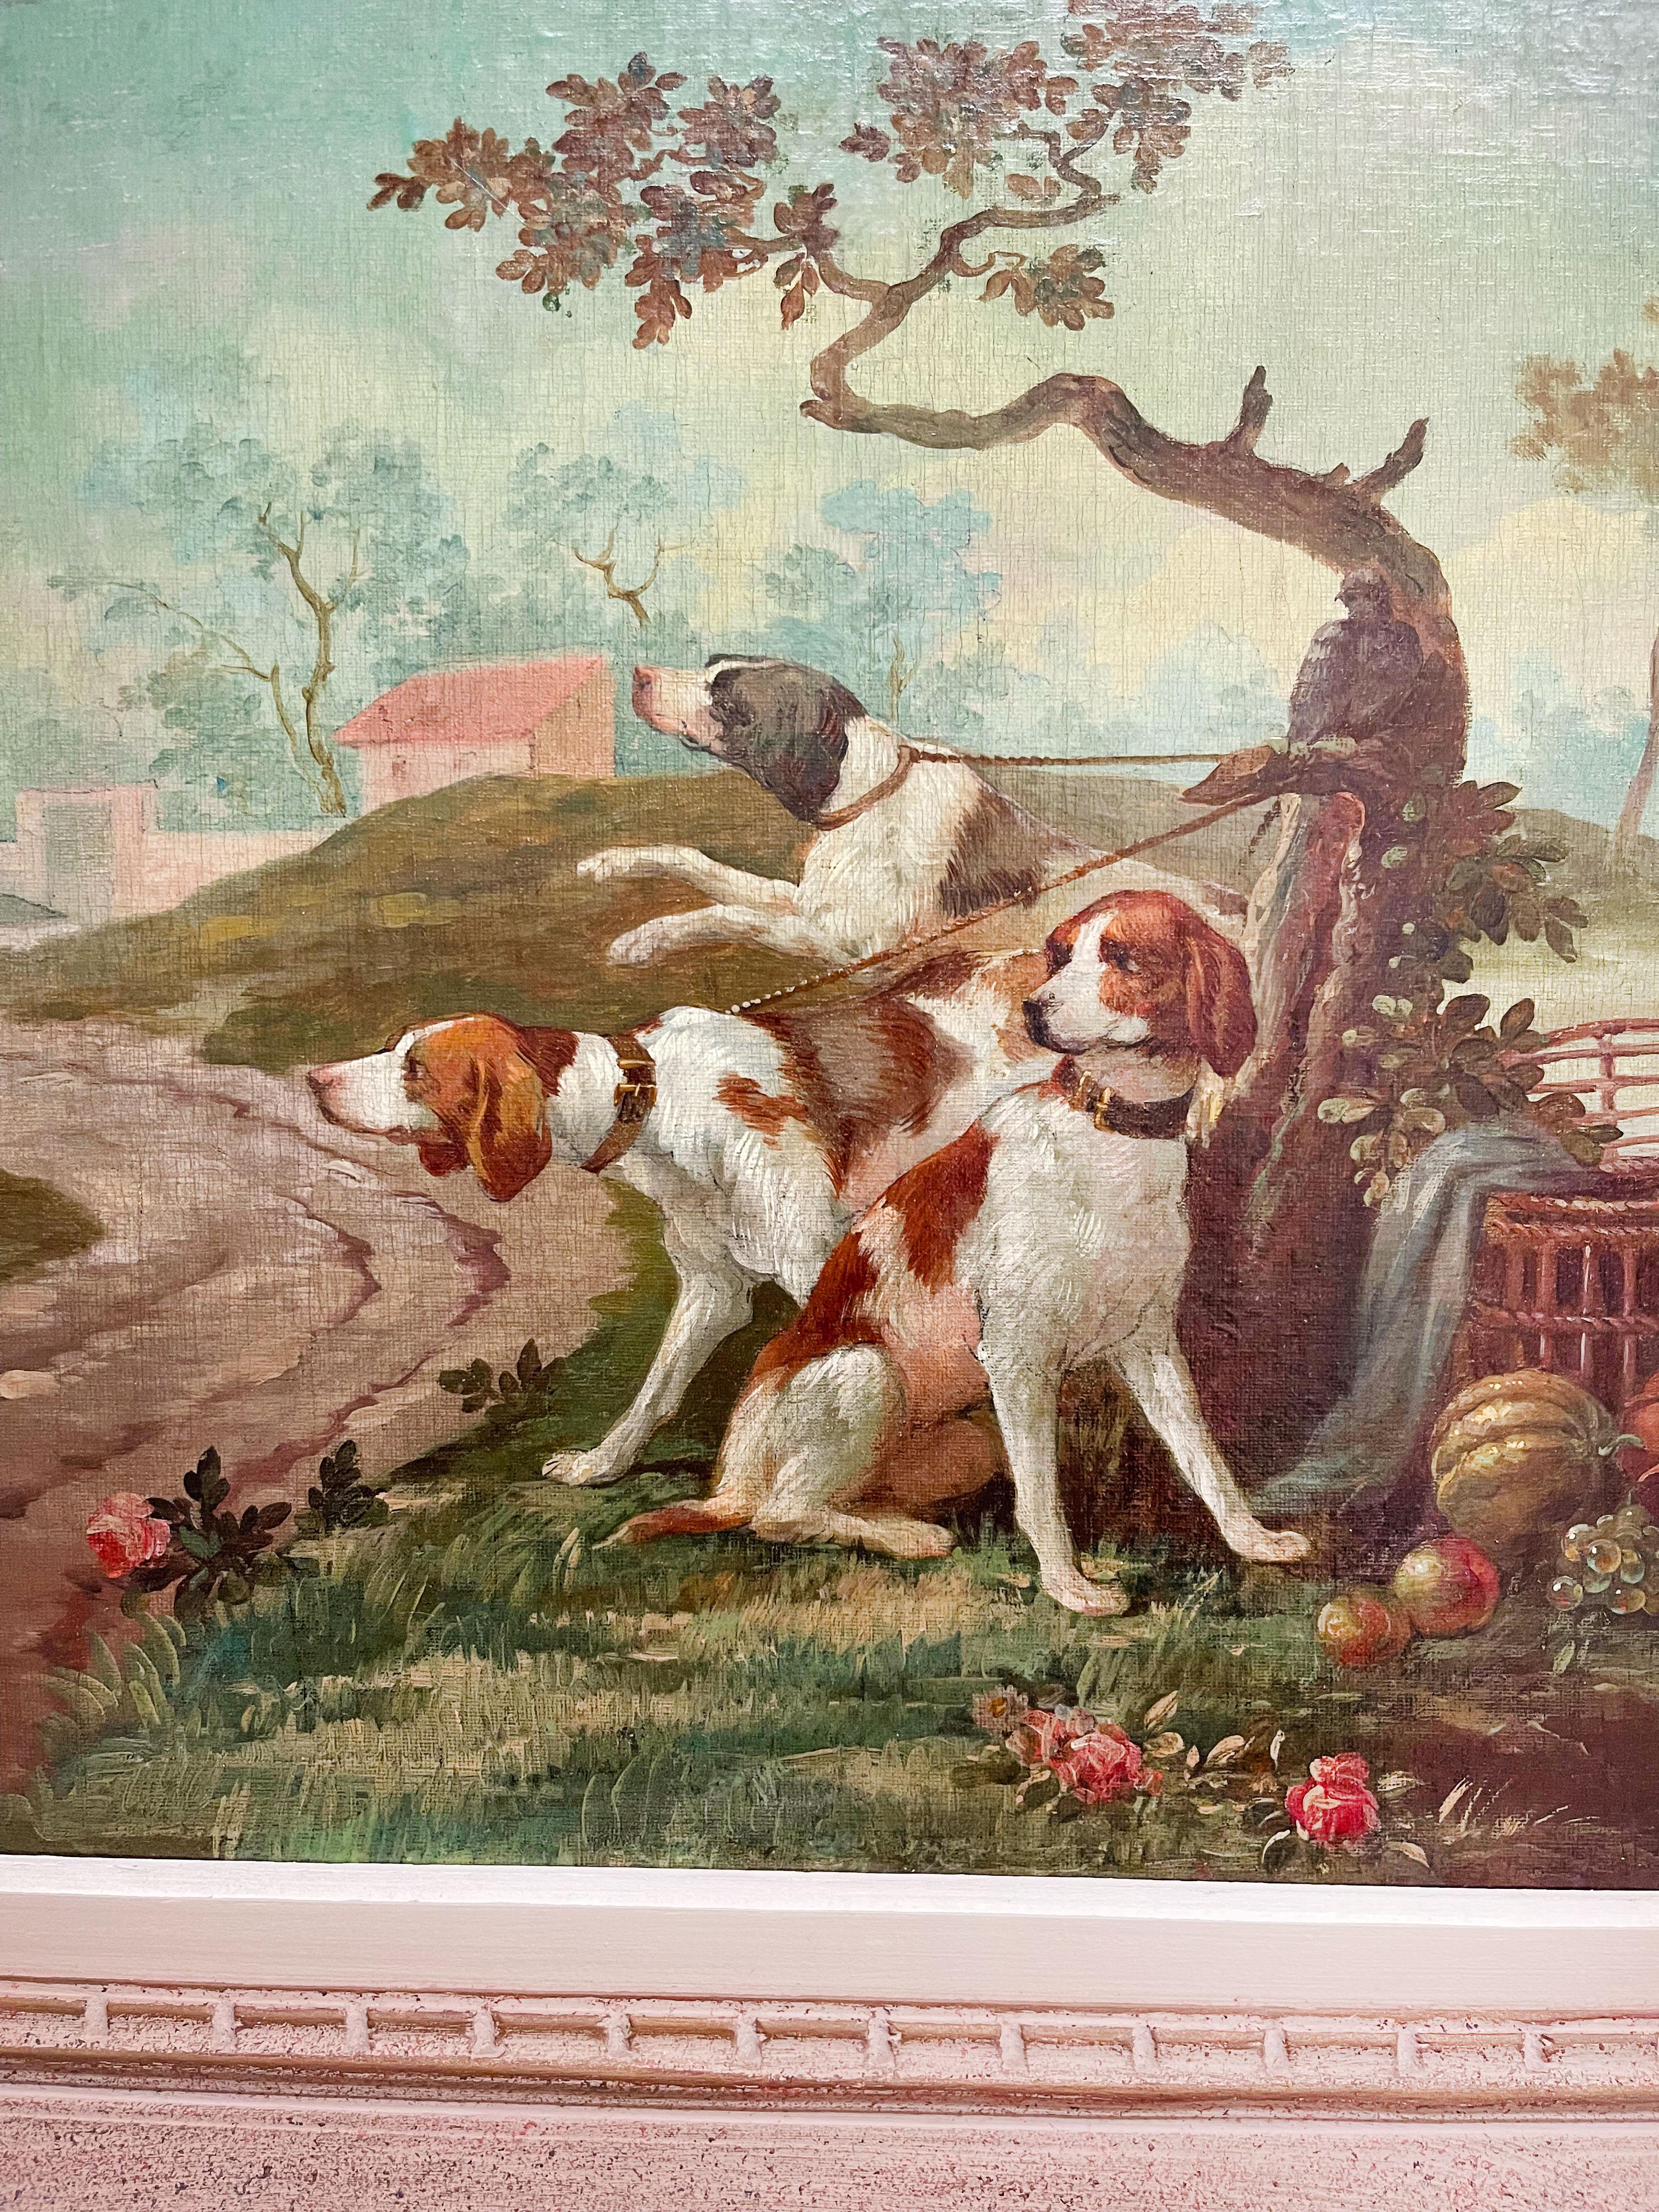 Oil On Canvas Painting Of Leashed Hounds Tied To A Tree, France, 18th Century 

Follower Of Alexandre-François Desportes (Champigneule 1661-1743 Paris)

Please Note: the frame is 1900

Frame: 26-1/2